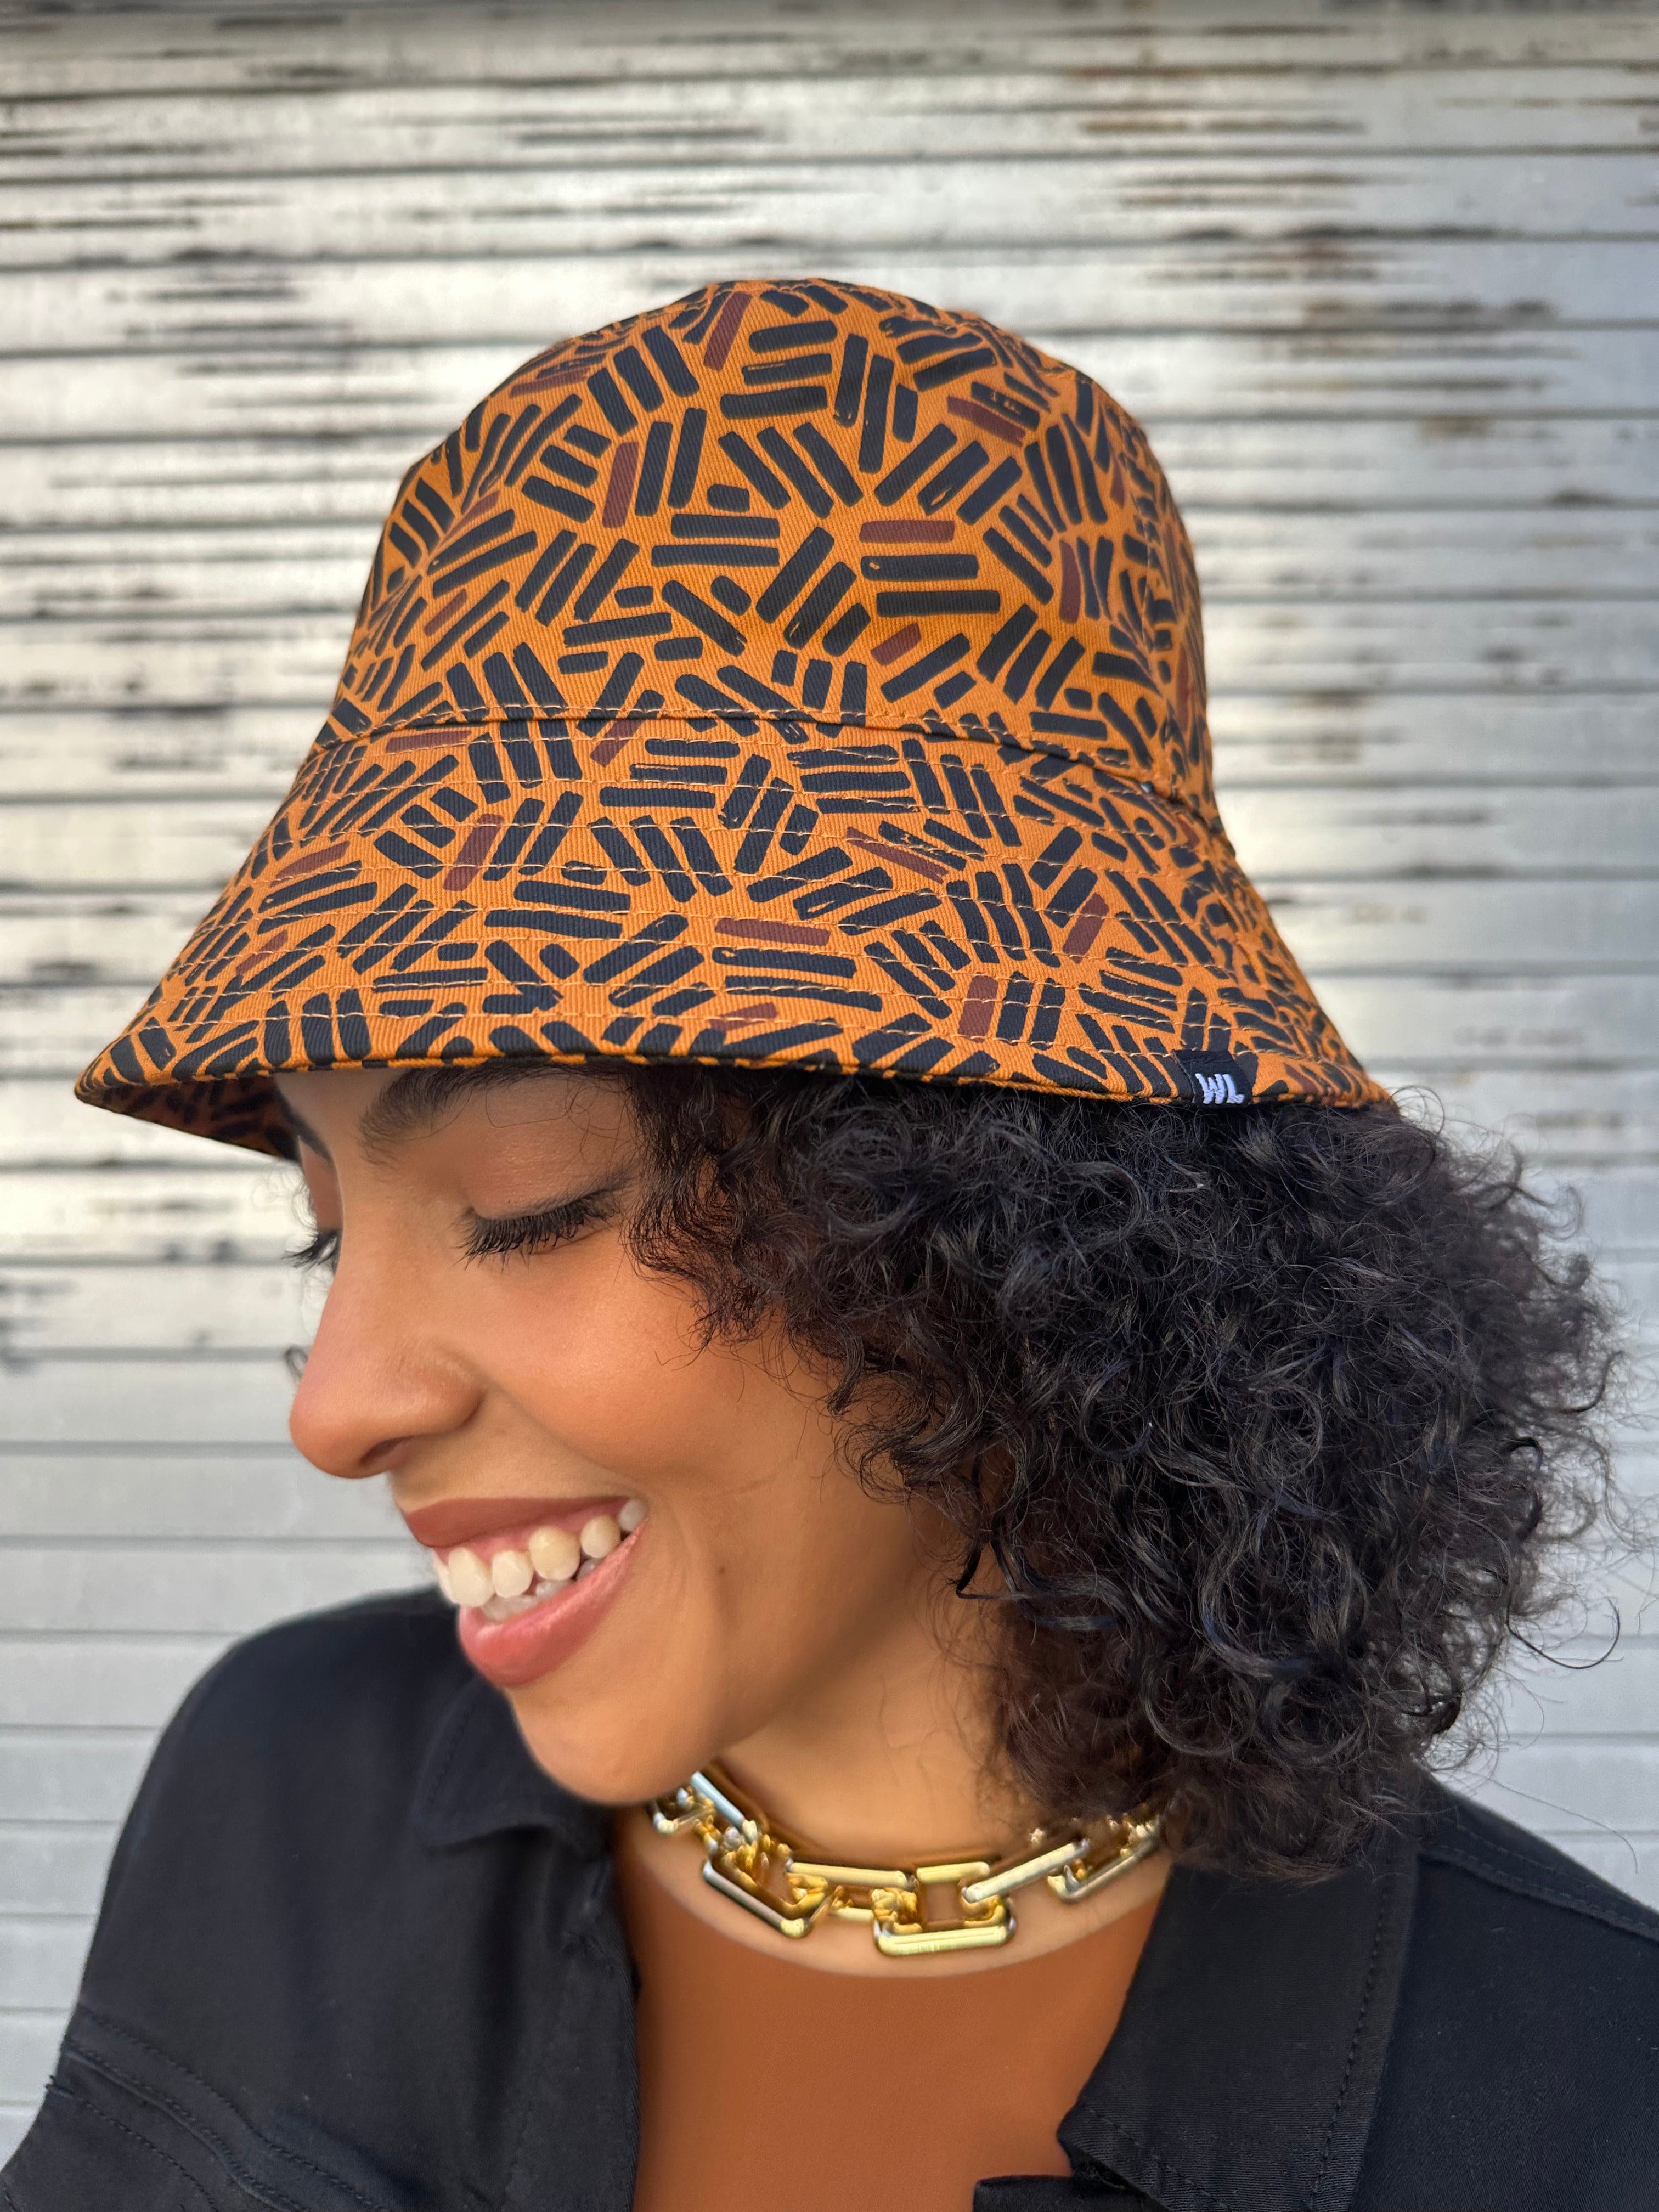 the-wrap-life-satin-lined-printed-bucket-hat-in-umber-hat-brown-30652726018161_573038fe-1c9d-4a54-a117-84ab92c76687.jpg